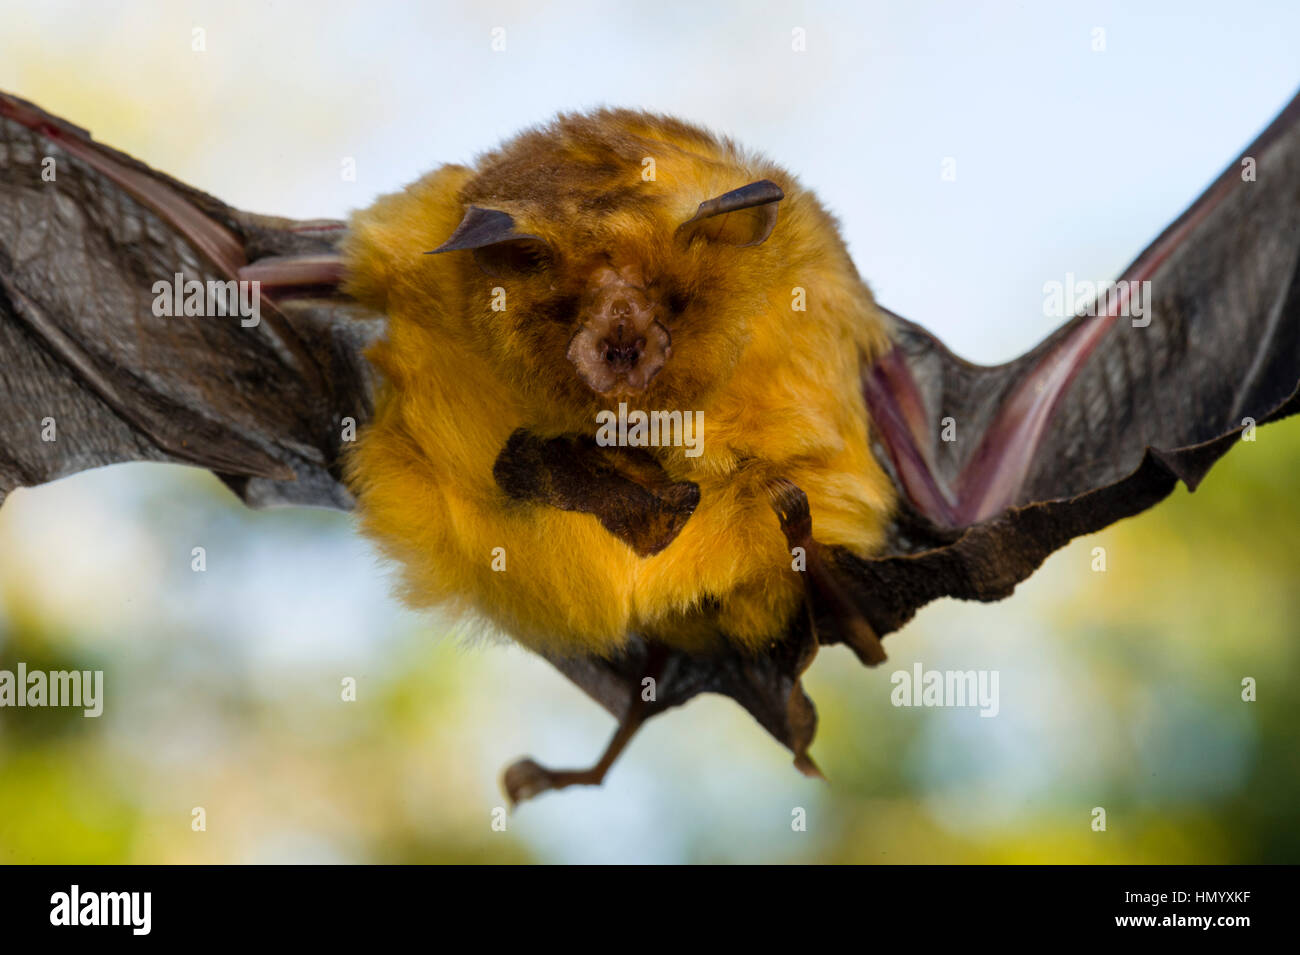 The face and torso of an Orange leaf-nosed Bat. Stock Photo